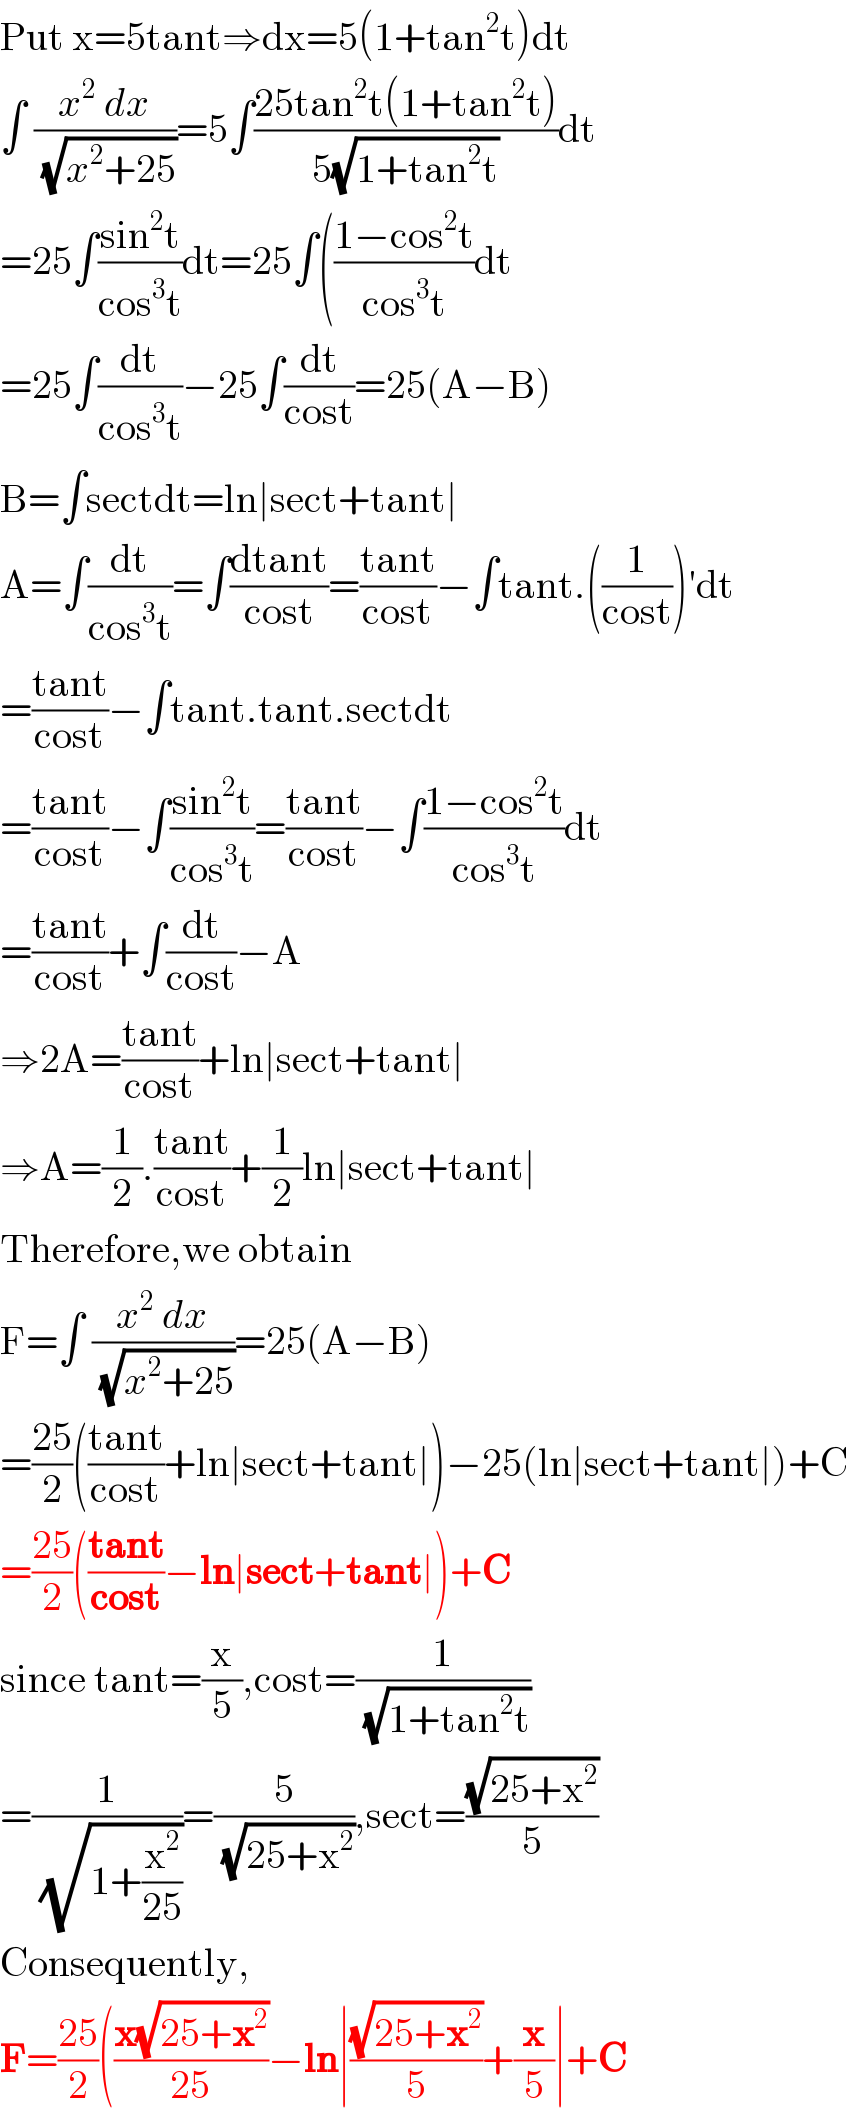 Put x=5tant⇒dx=5(1+tan^2 t)dt  ∫ ((x^2  dx)/( (√(x^2 +25))))=5∫((25tan^2 t(1+tan^2 t))/(5(√(1+tan^2 t))))dt  =25∫((sin^2 t)/(cos^3 t))dt=25∫(((1−cos^2 t)/(cos^3 t))dt  =25∫(dt/(cos^3 t))−25∫(dt/(cost))=25(A−B)  B=∫sectdt=ln∣sect+tant∣  A=∫(dt/(cos^3 t))=∫((dtant)/(cost))=((tant)/(cost))−∫tant.((1/(cost)))′dt  =((tant)/(cost))−∫tant.tant.sectdt  =((tant)/(cost))−∫((sin^2 t)/(cos^3 t))=((tant)/(cost))−∫((1−cos^2 t)/(cos^3 t))dt  =((tant)/(cost))+∫(dt/(cost))−A  ⇒2A=((tant)/(cost))+ln∣sect+tant∣  ⇒A=(1/2).((tant)/(cost))+(1/2)ln∣sect+tant∣  Therefore,we obtain  F=∫ ((x^2  dx)/( (√(x^2 +25))))=25(A−B)  =((25)/2)(((tant)/(cost))+ln∣sect+tant∣)−25(ln∣sect+tant∣)+C  =((25)/2)(((tant)/(cost))−ln∣sect+tant∣)+C   since tant=(x/5),cost=(1/( (√(1+tan^2 t))))  =(1/( (√(1+(x^2 /(25))))))=(5/( (√(25+x^2 )))),sect=((√(25+x^2 ))/5)  Consequently,  F=((25)/2)(((x(√(25+x^2 )))/(25))−ln∣((√(25+x^2 ))/5)+(x/5)∣+C  